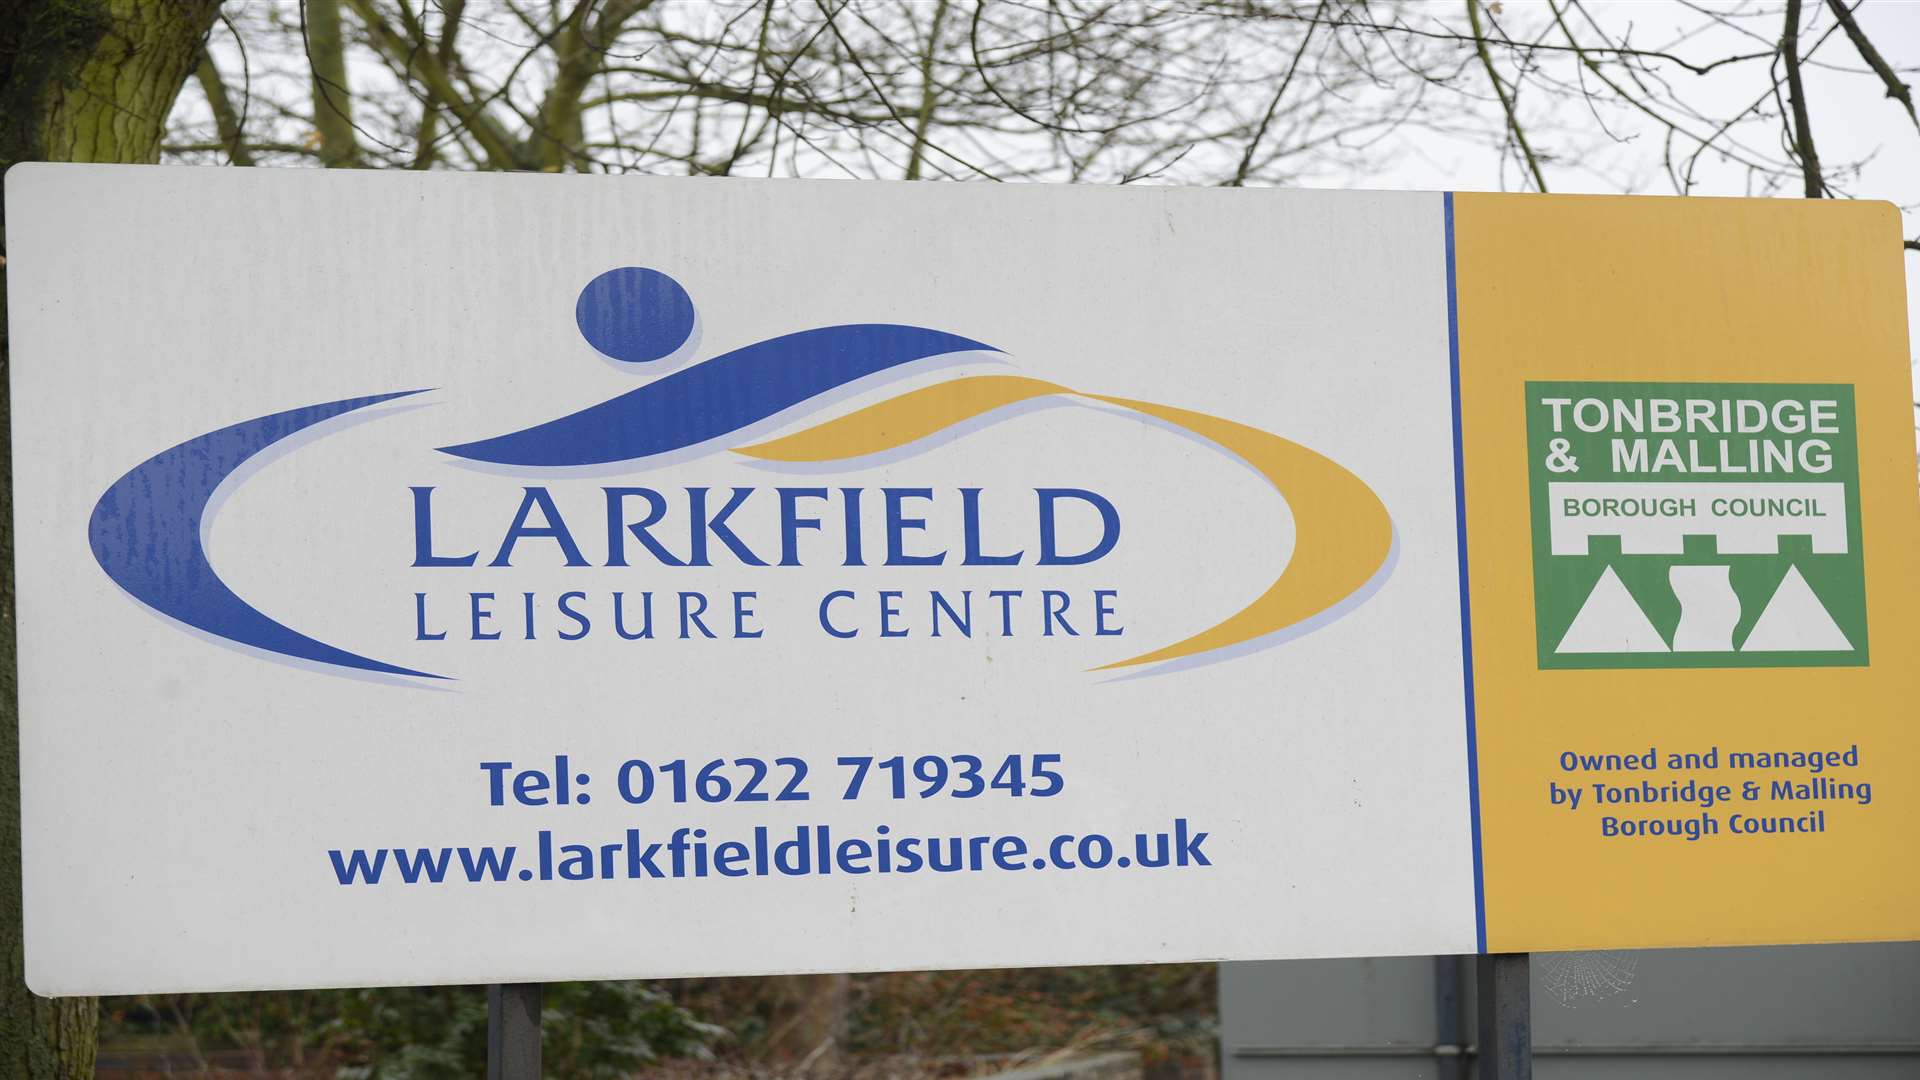 John Jackson resigned from his position at Larkfield Leisure Centre